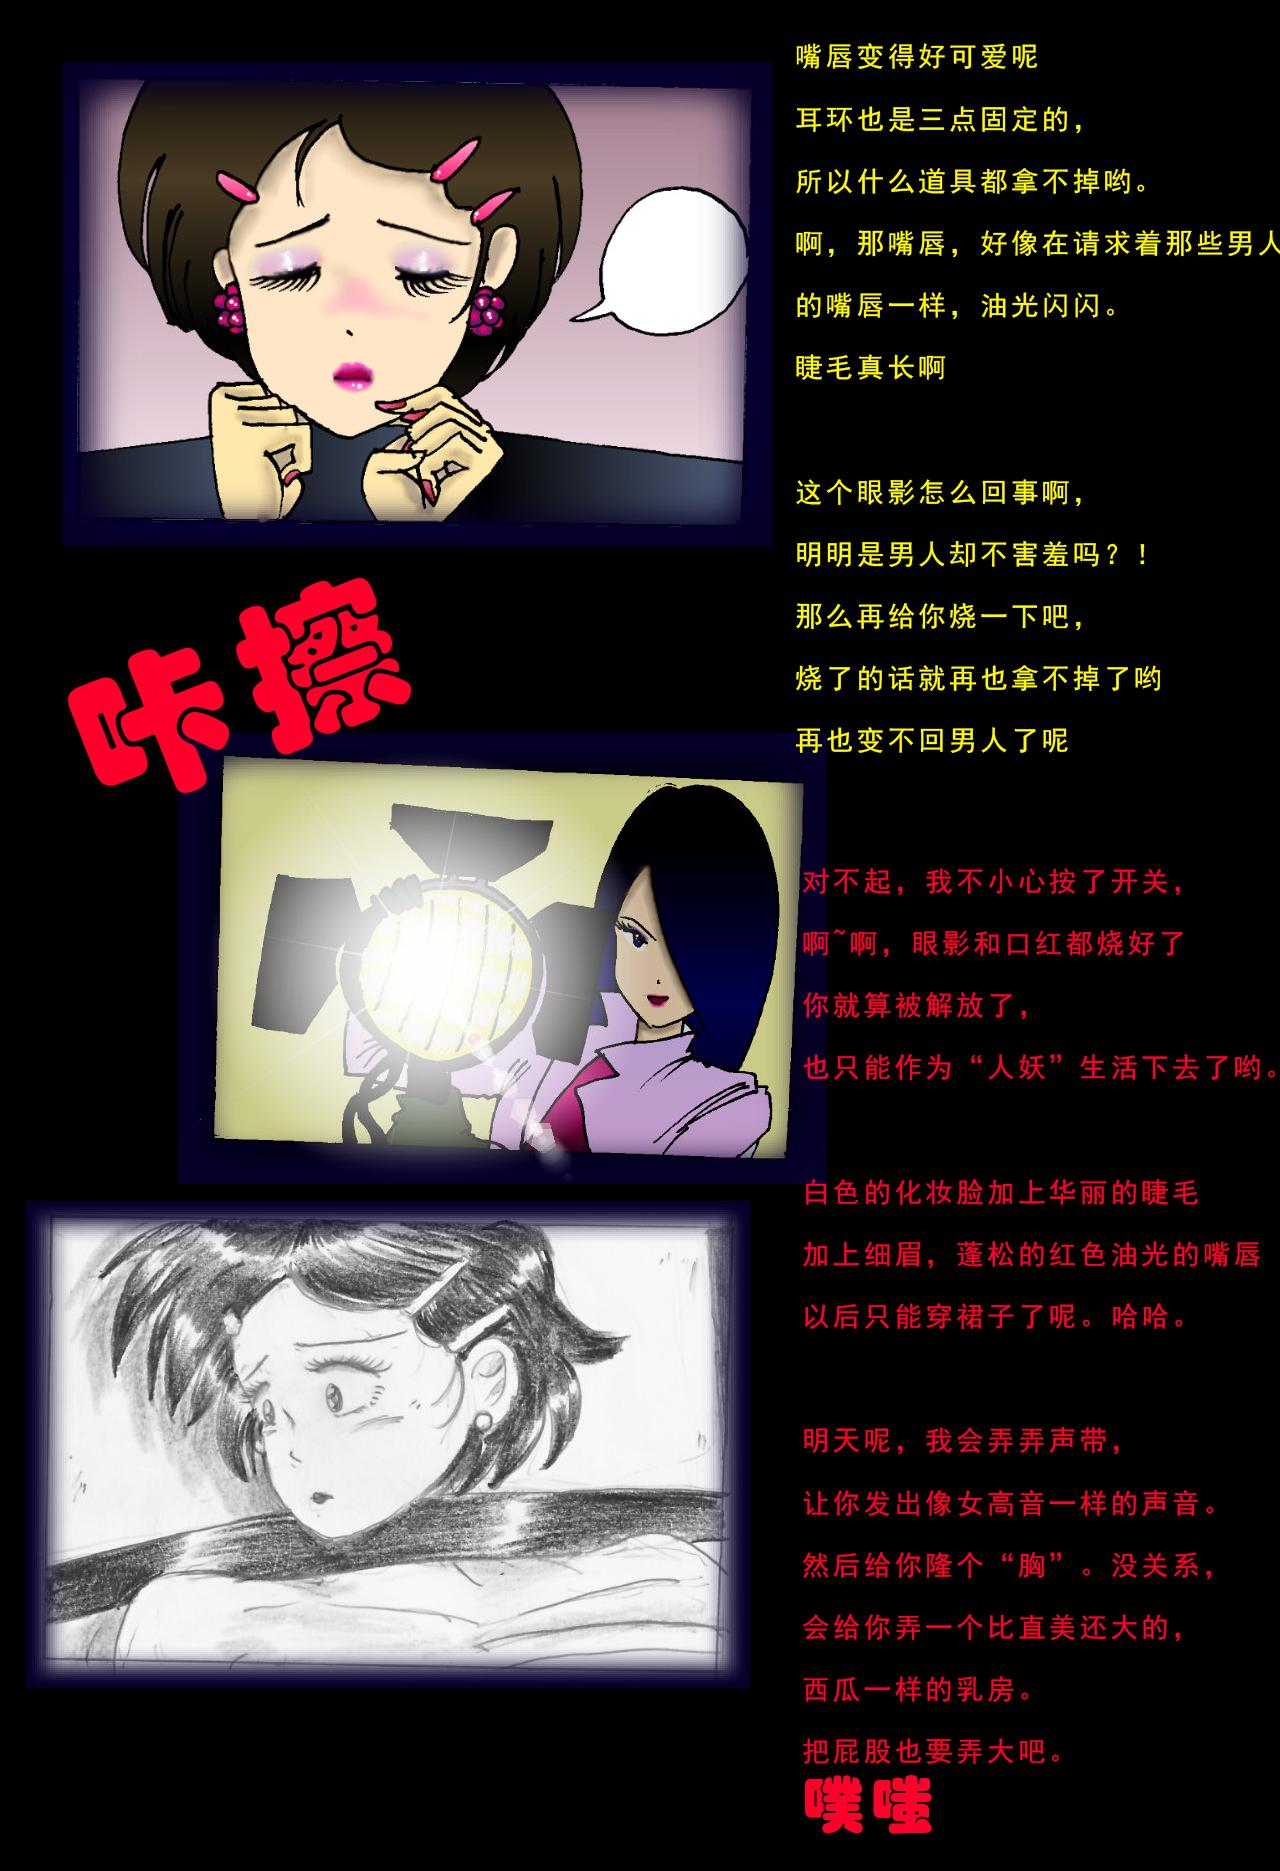 Rebolando Special Police Third Platoon Captain Abduction Restraint Edition【chinese】 Gets - Page 8